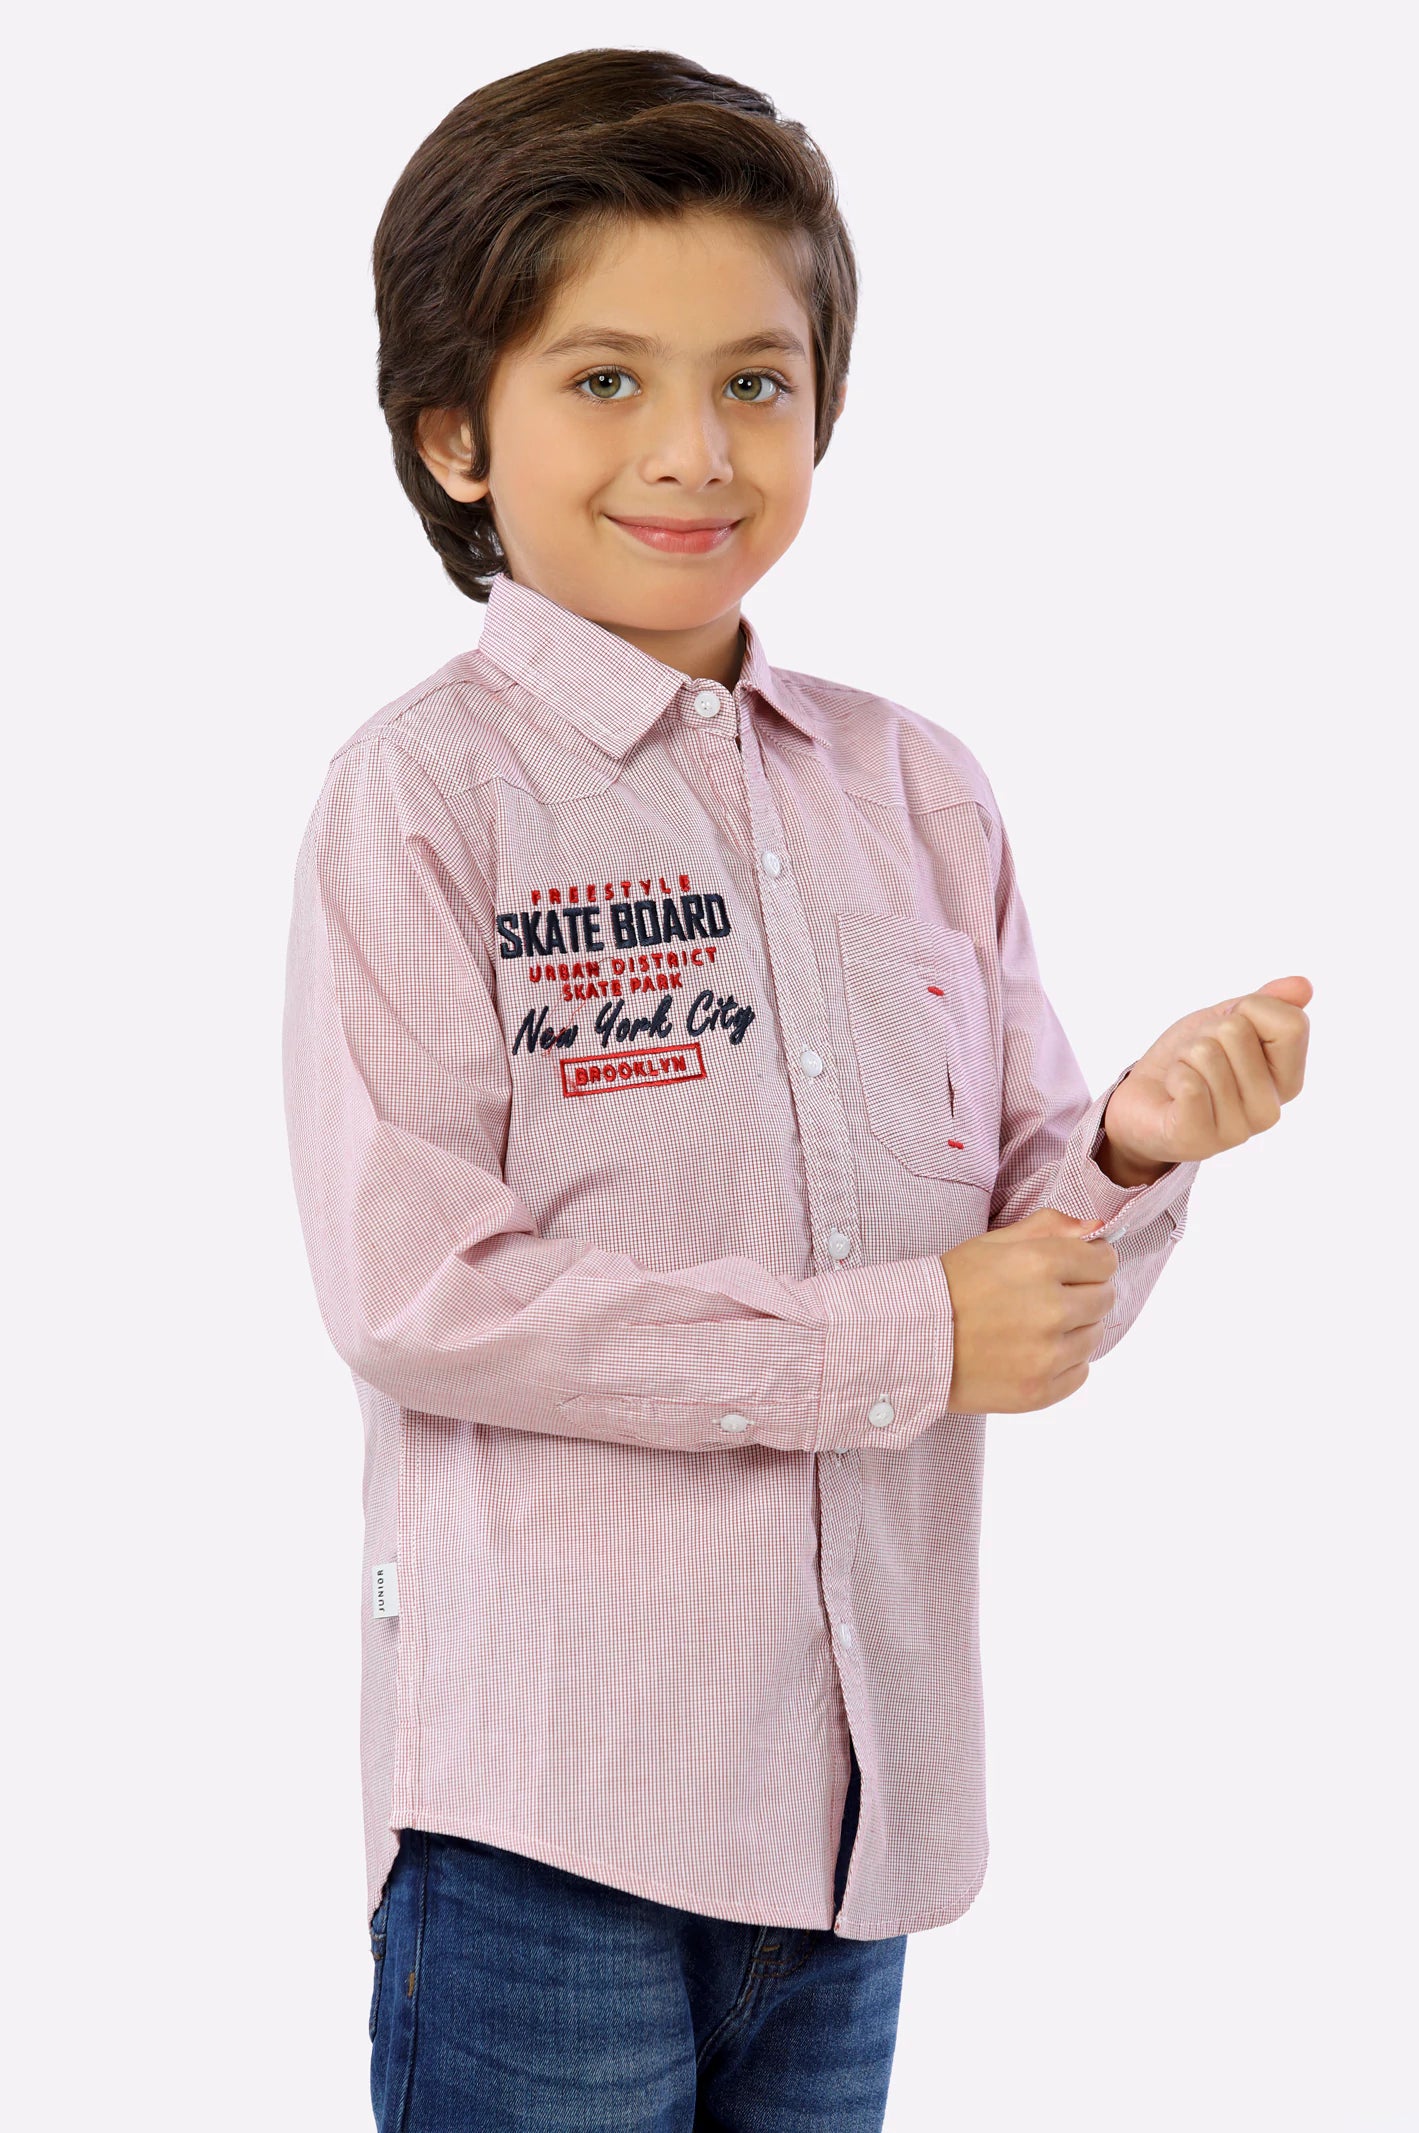 Red Mini-Check Boys Shirt From Diners